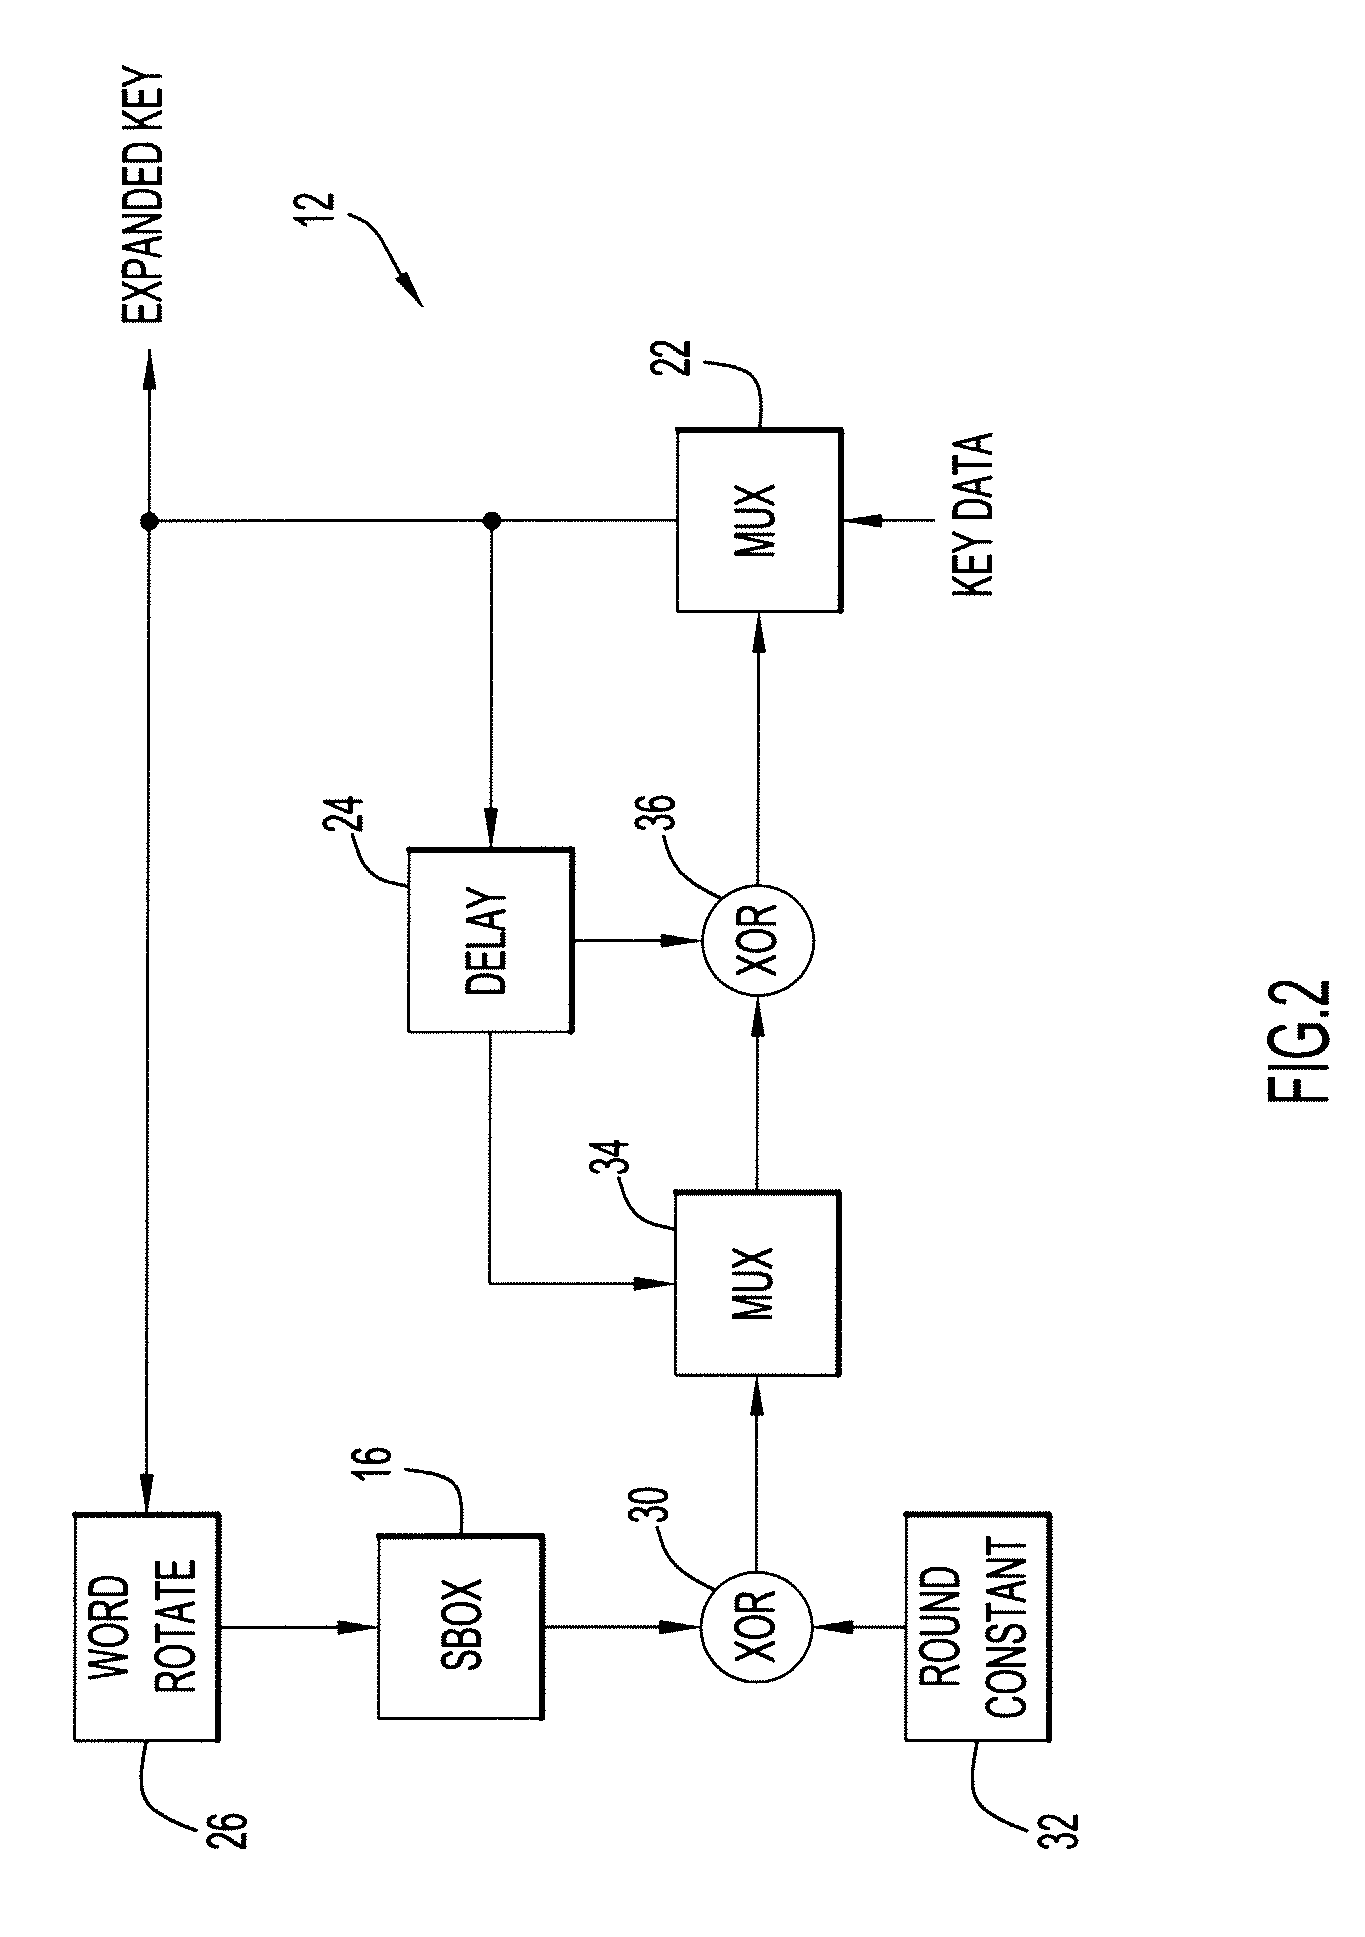 Method and Apparatus for Key Expansion to Encode Data